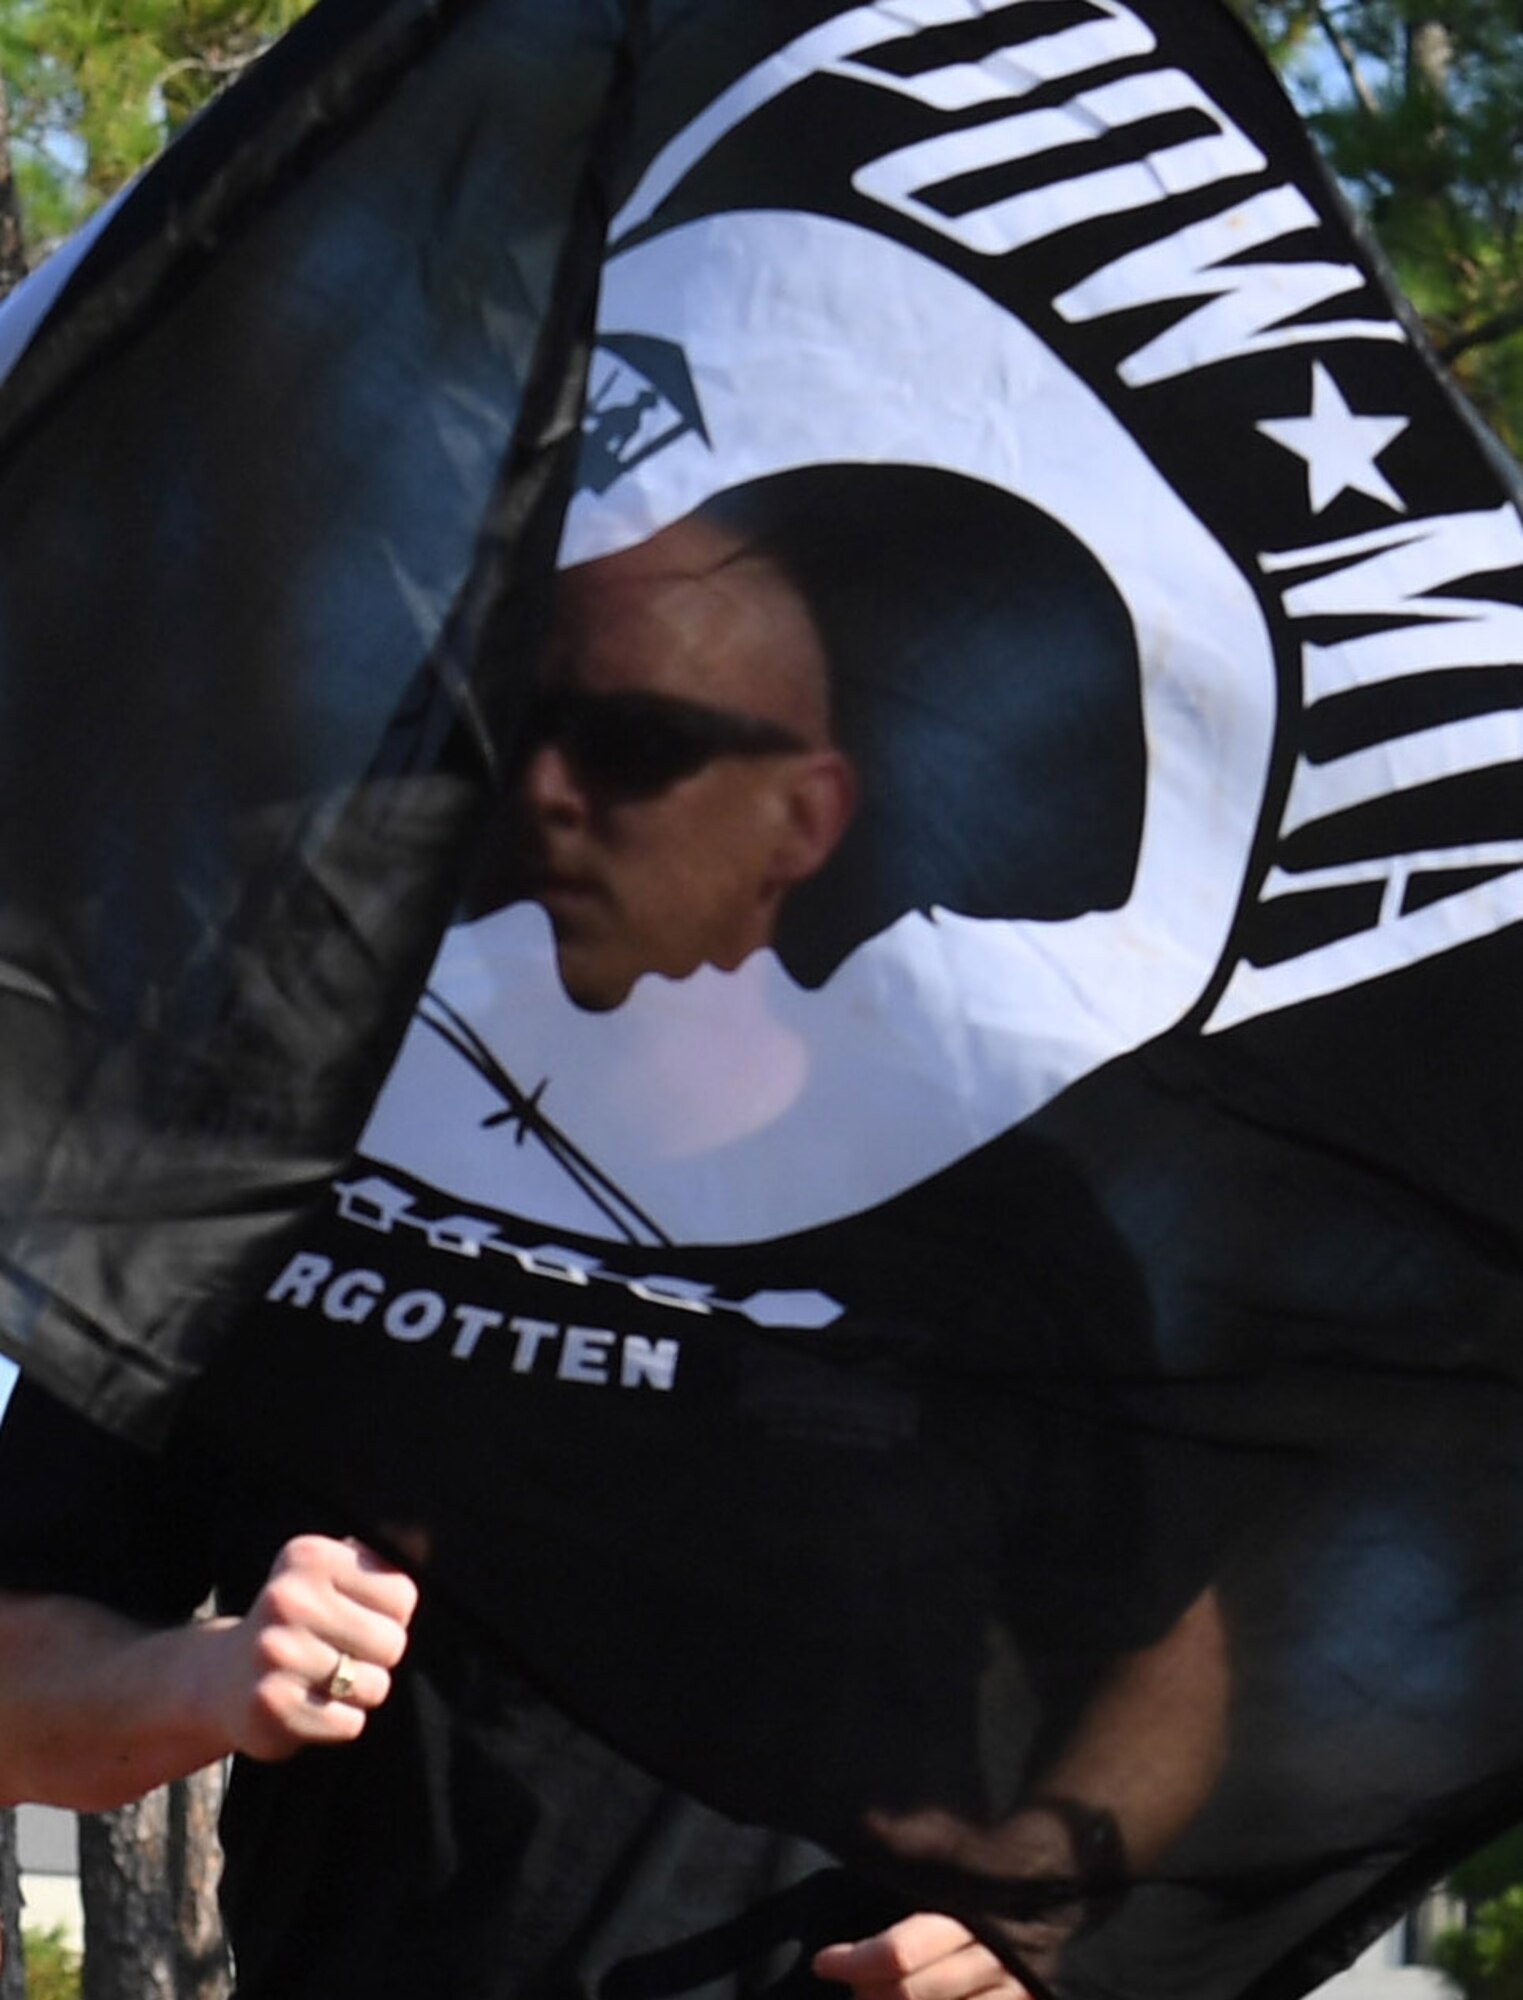 U.S. Air Force Chief Master Sgt. Timothy Gibson, 602nd Training Group (Provisional) superintendent, participates in Keesler’s POW/MIA 24-hour memorial run and vigil at the Crotwell Track on Keesler Air Force Base, Mississippi, Sept. 18, 2019. This event is held annually to raise awareness and pay tribute to all prisoners of war and the military members still missing in action. (U.S. Air Force photo by Kemberly Groue)